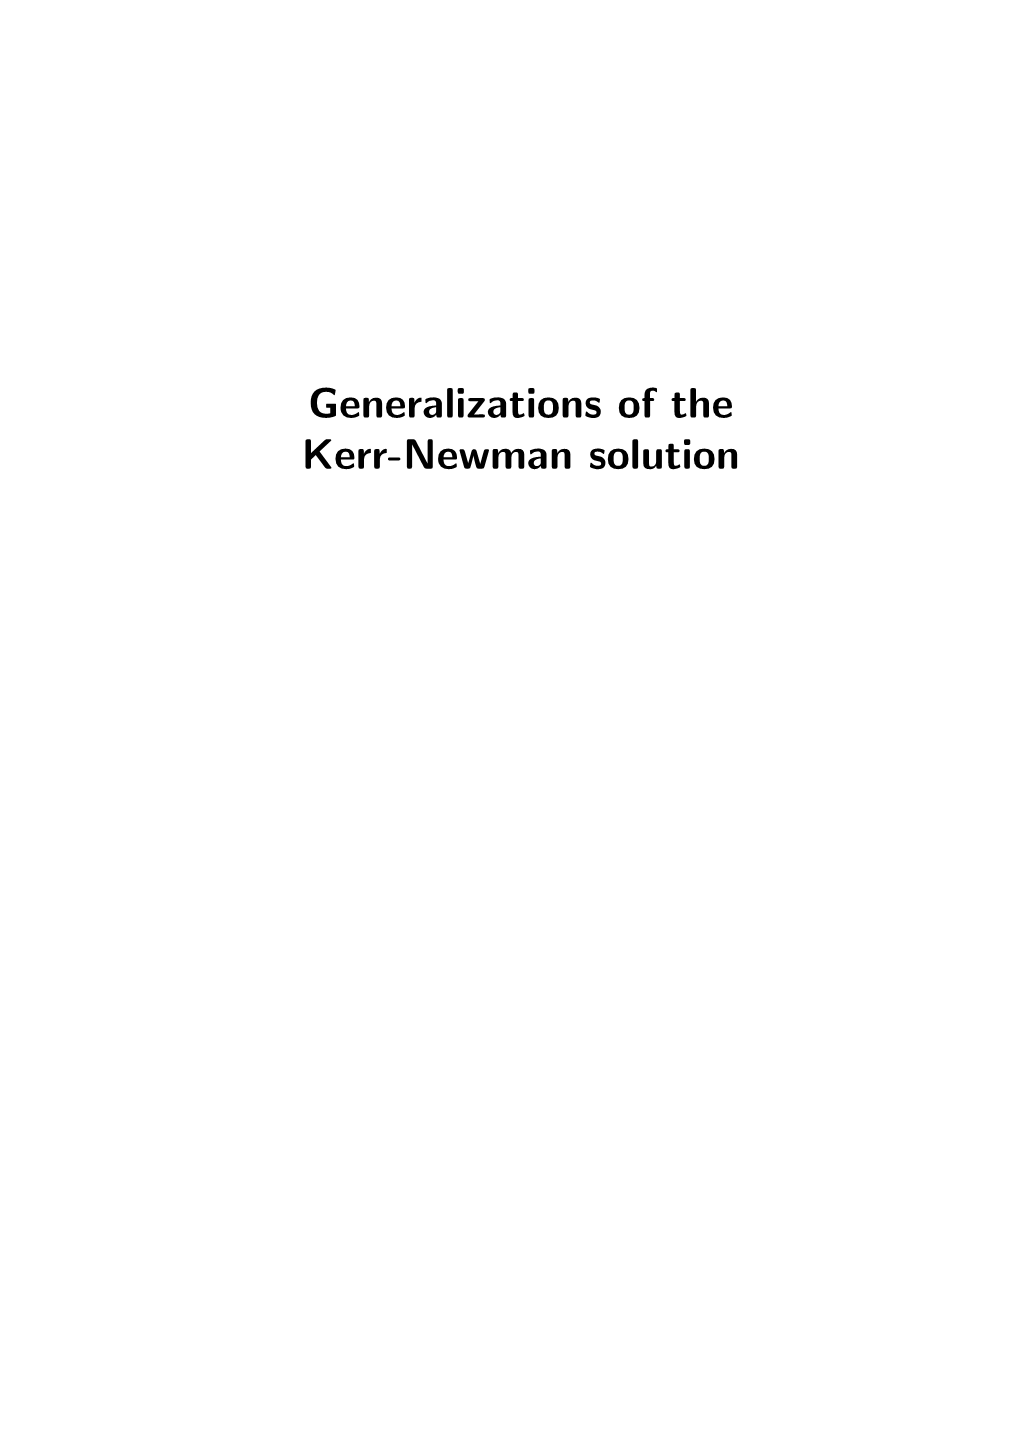 Generalizations of the Kerr-Newman Solution